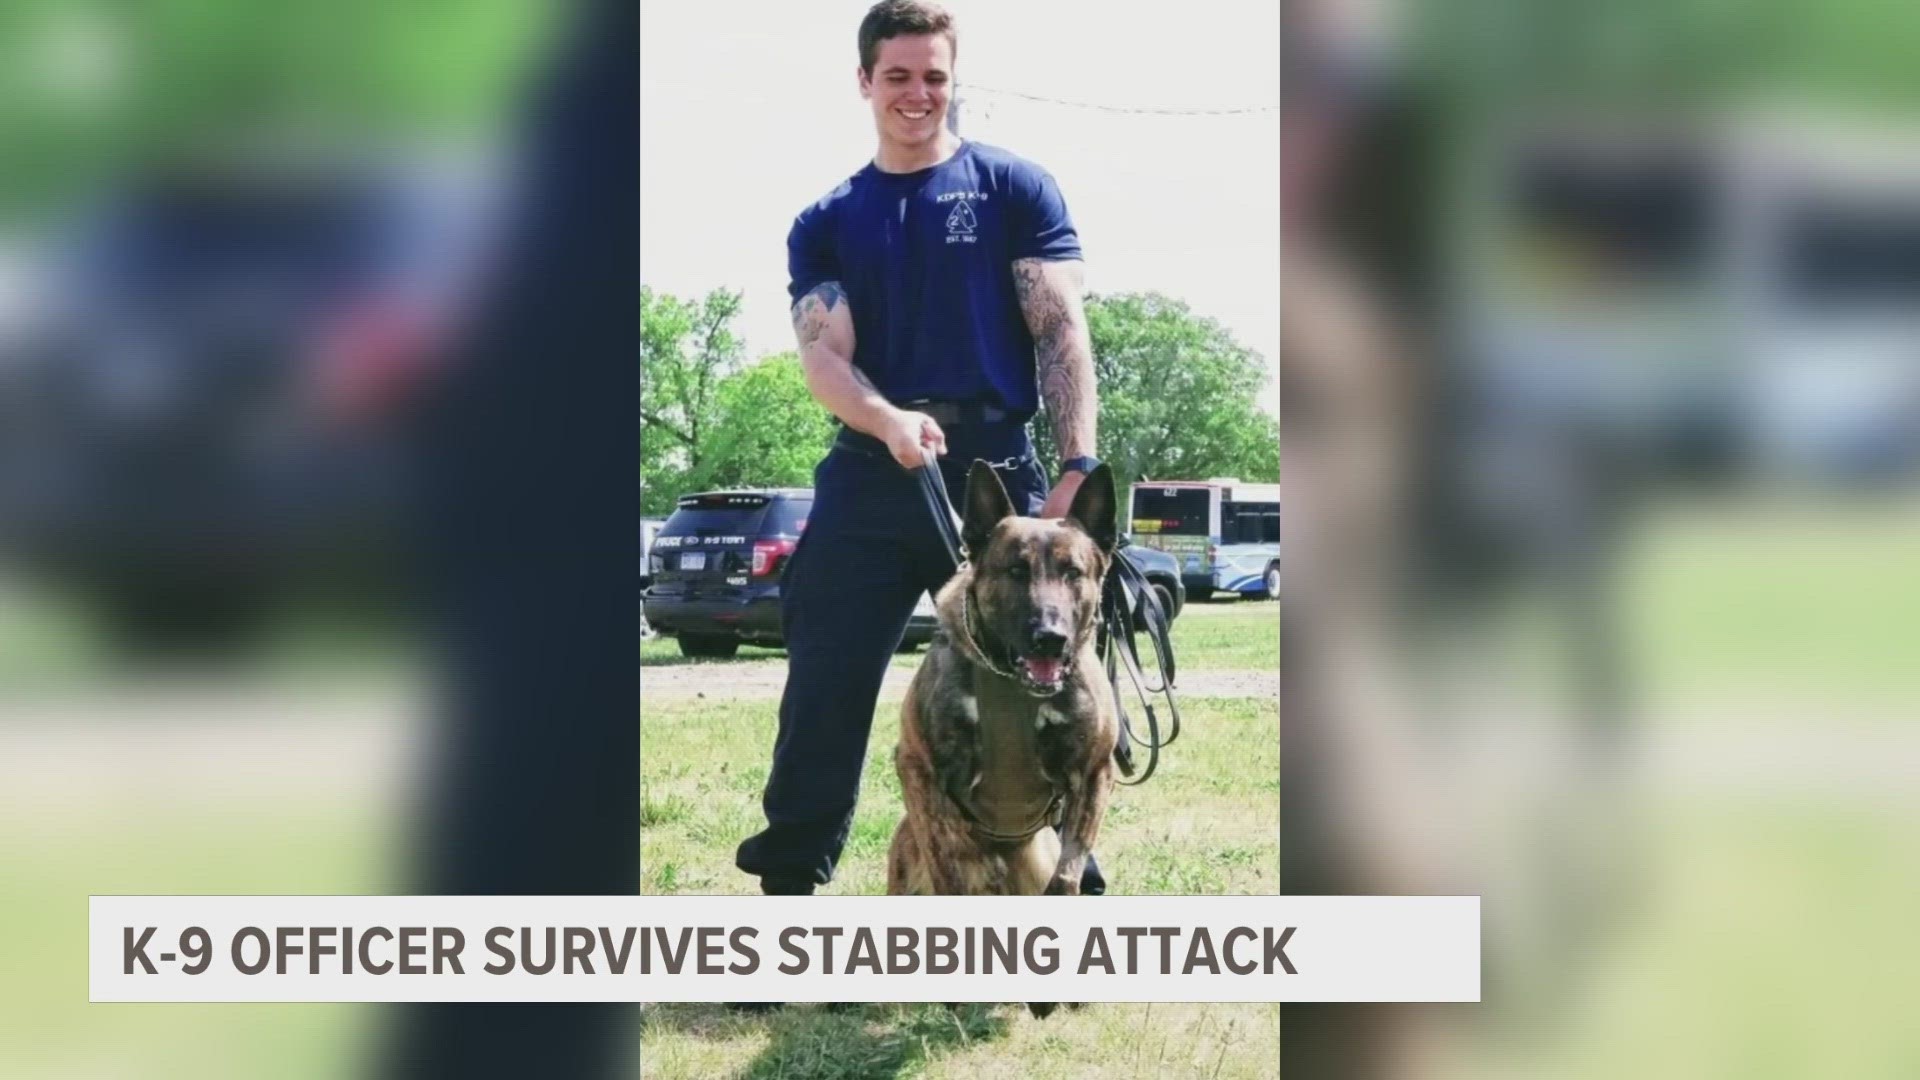 "Had he not done that, I don't know if he would have made it," said K9 Sledge's vet, praising the actions Sledge's handler helped save his life.